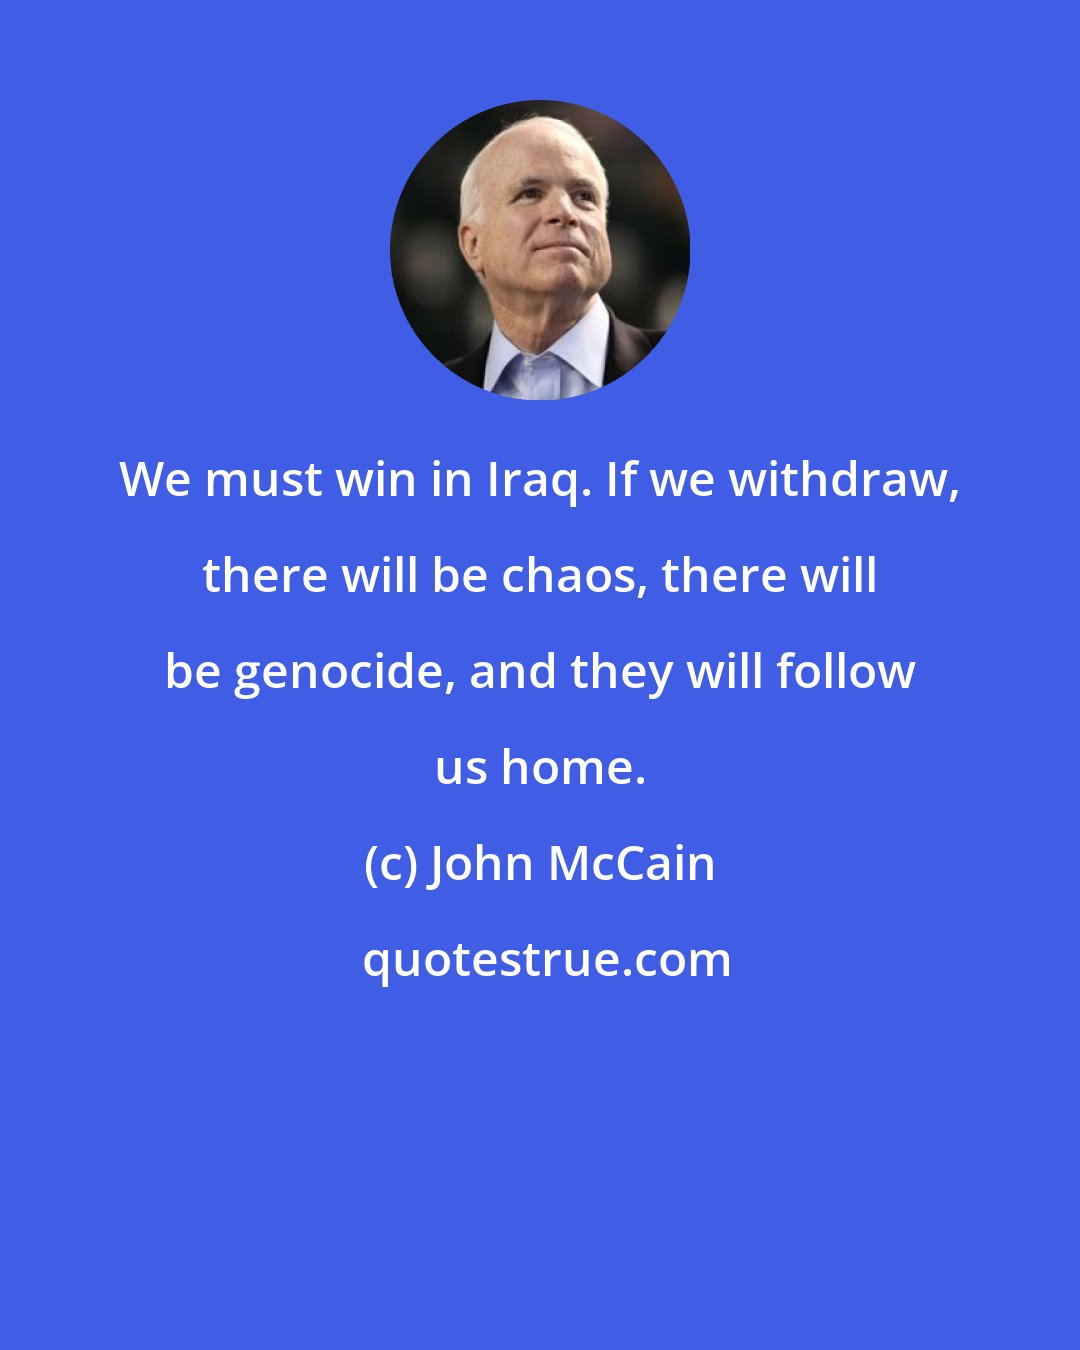 John McCain: We must win in Iraq. If we withdraw, there will be chaos, there will be genocide, and they will follow us home.